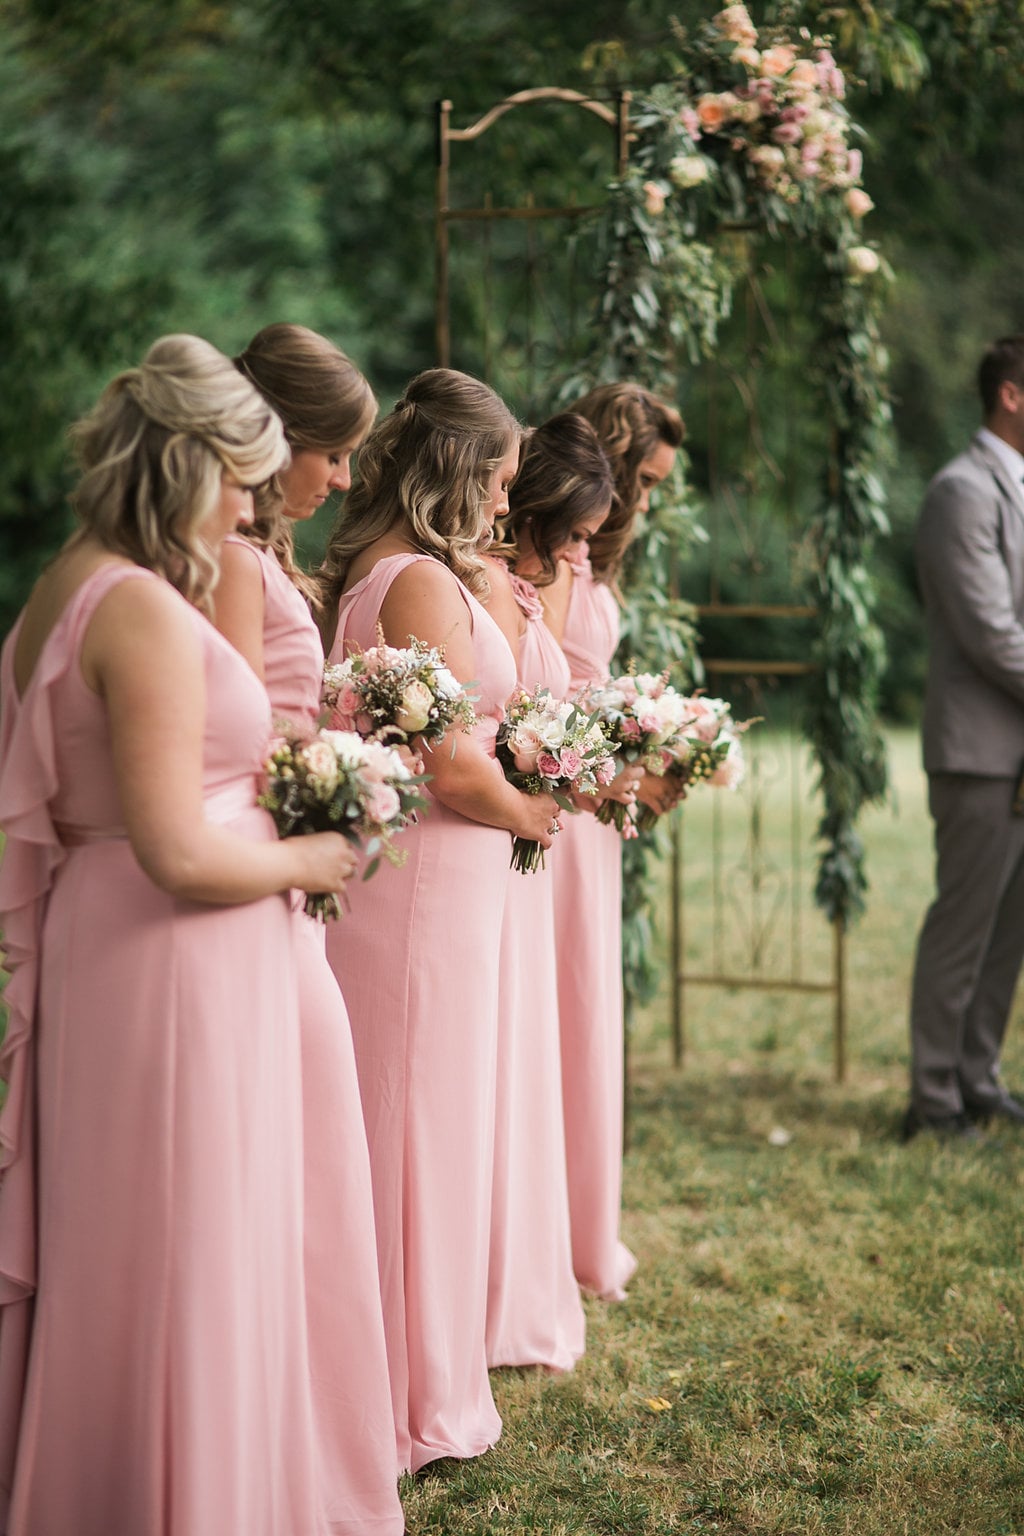 Rustic Wedding Ceremony with light pink and peach color scheme // Nashville Wedding Flowers